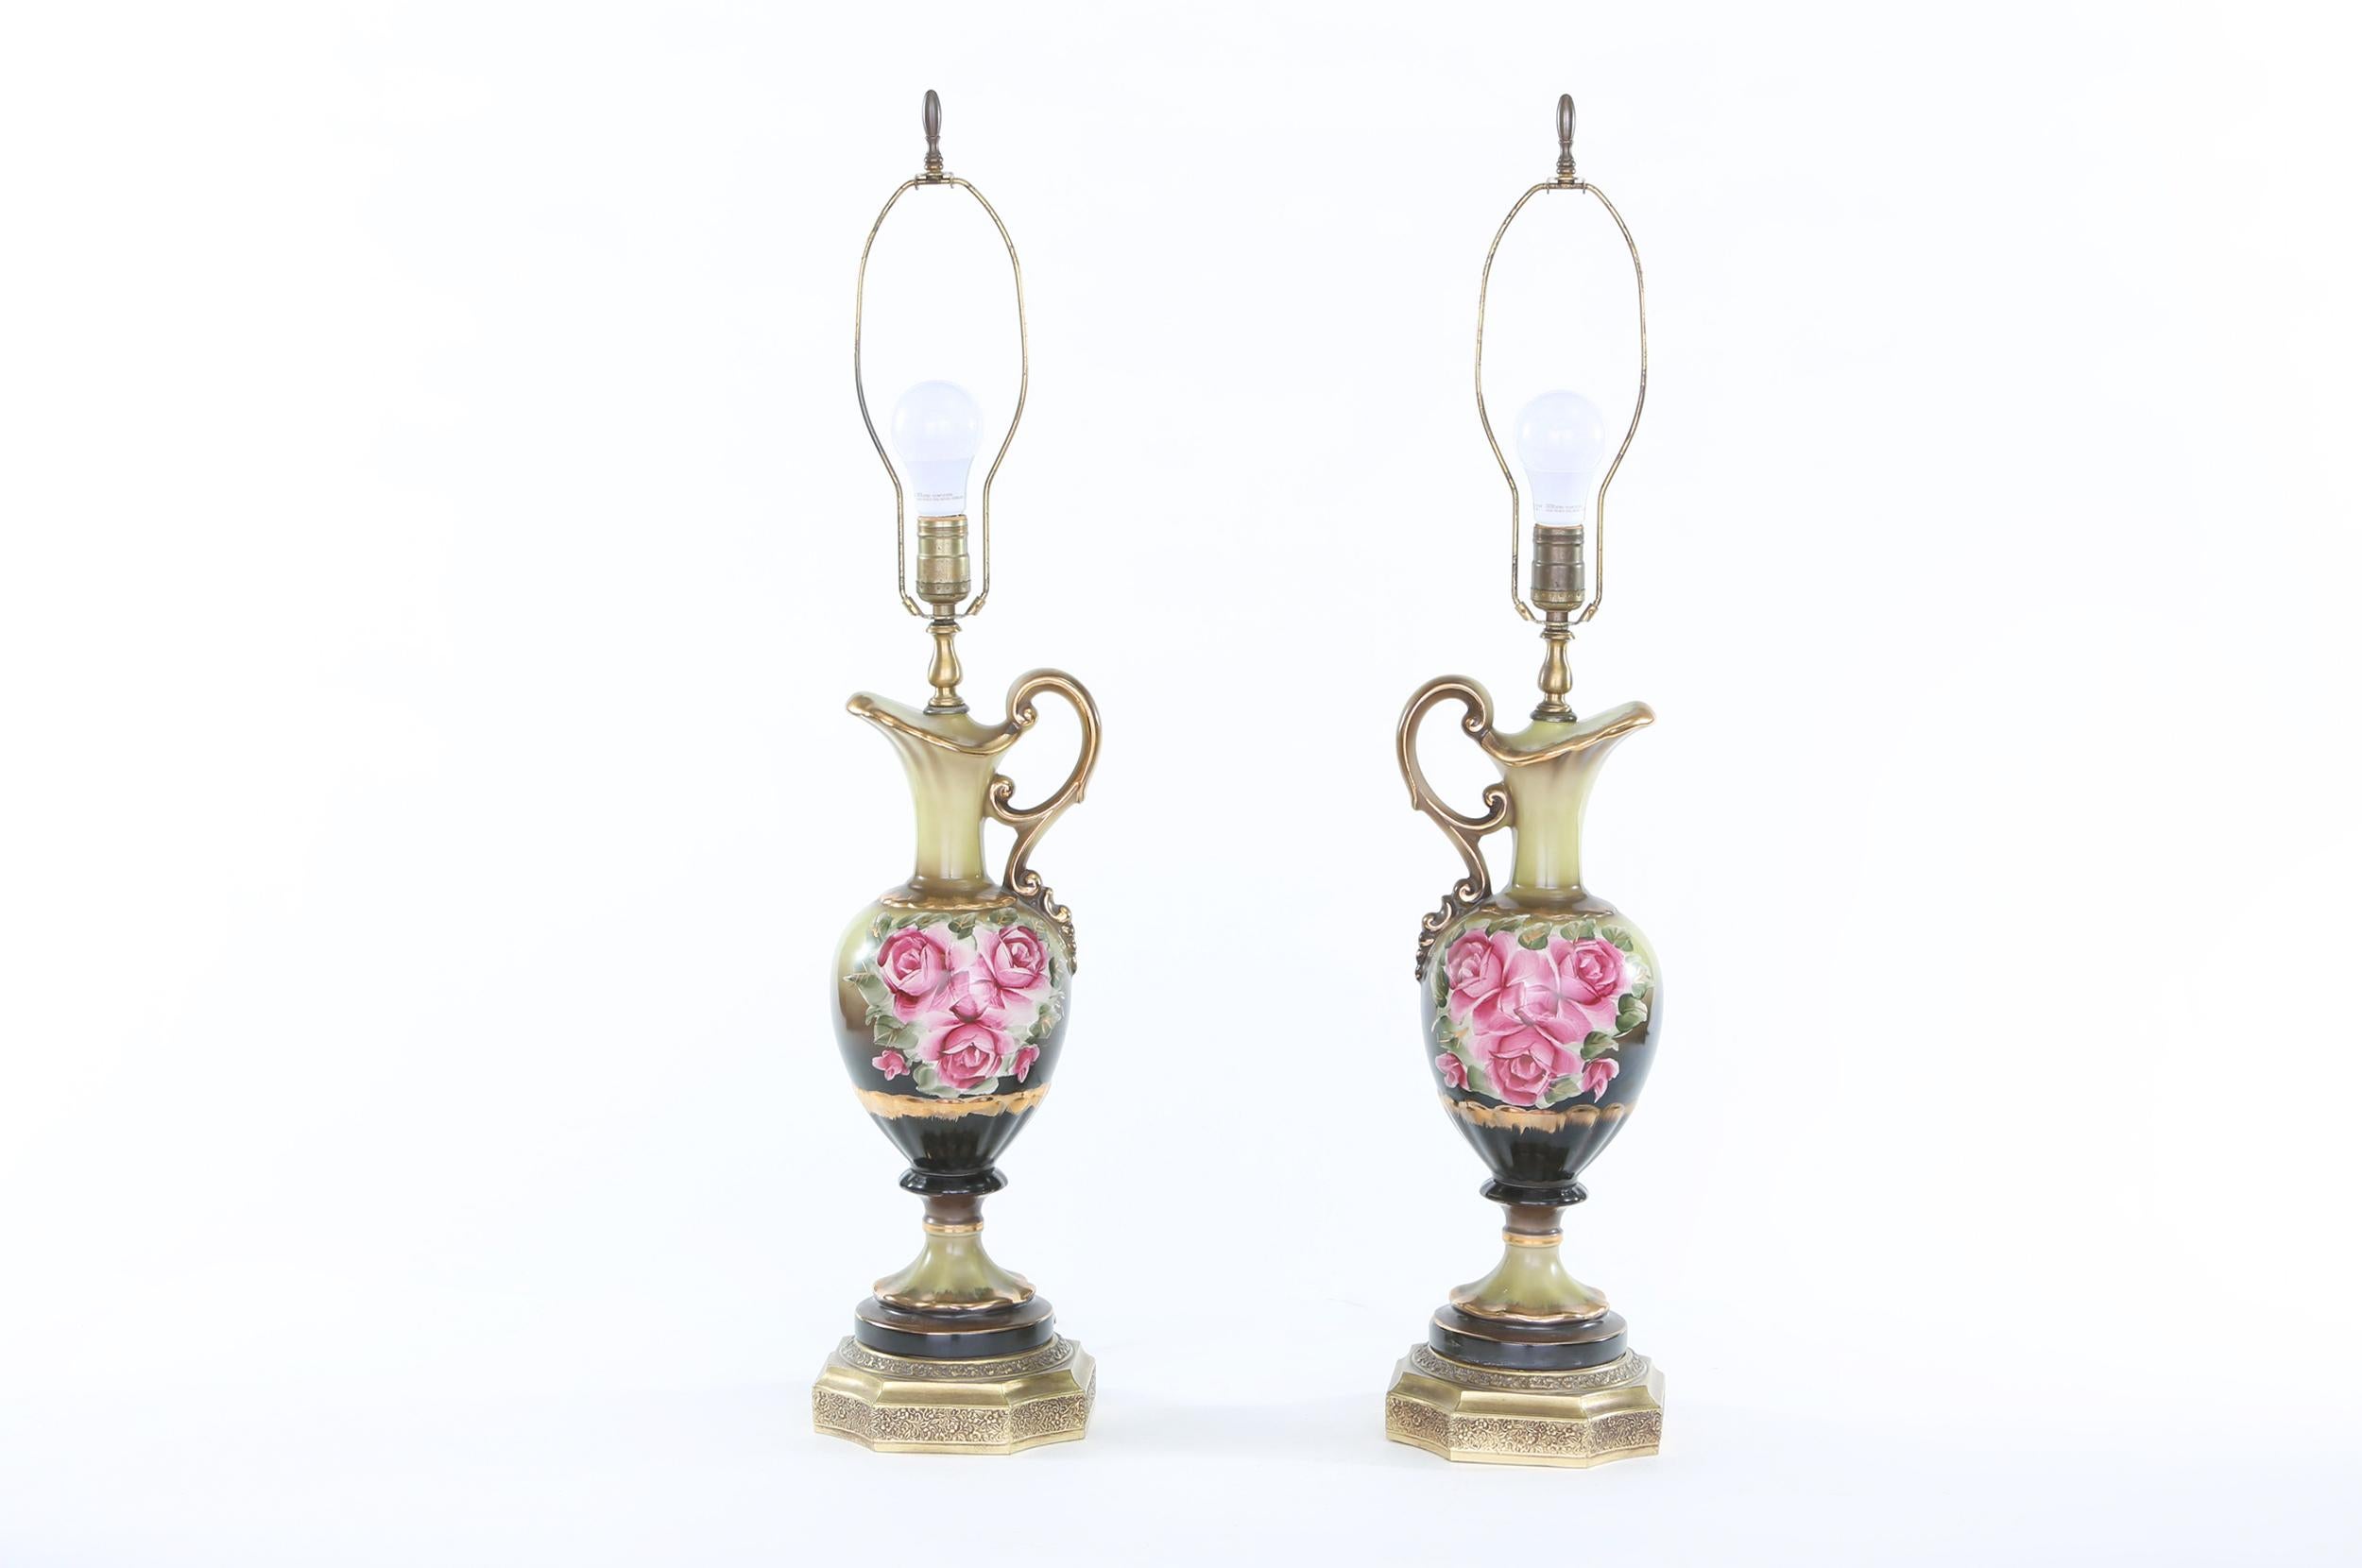 Brass Early 20th Century Gilt Porcelain Pair Table Lamps